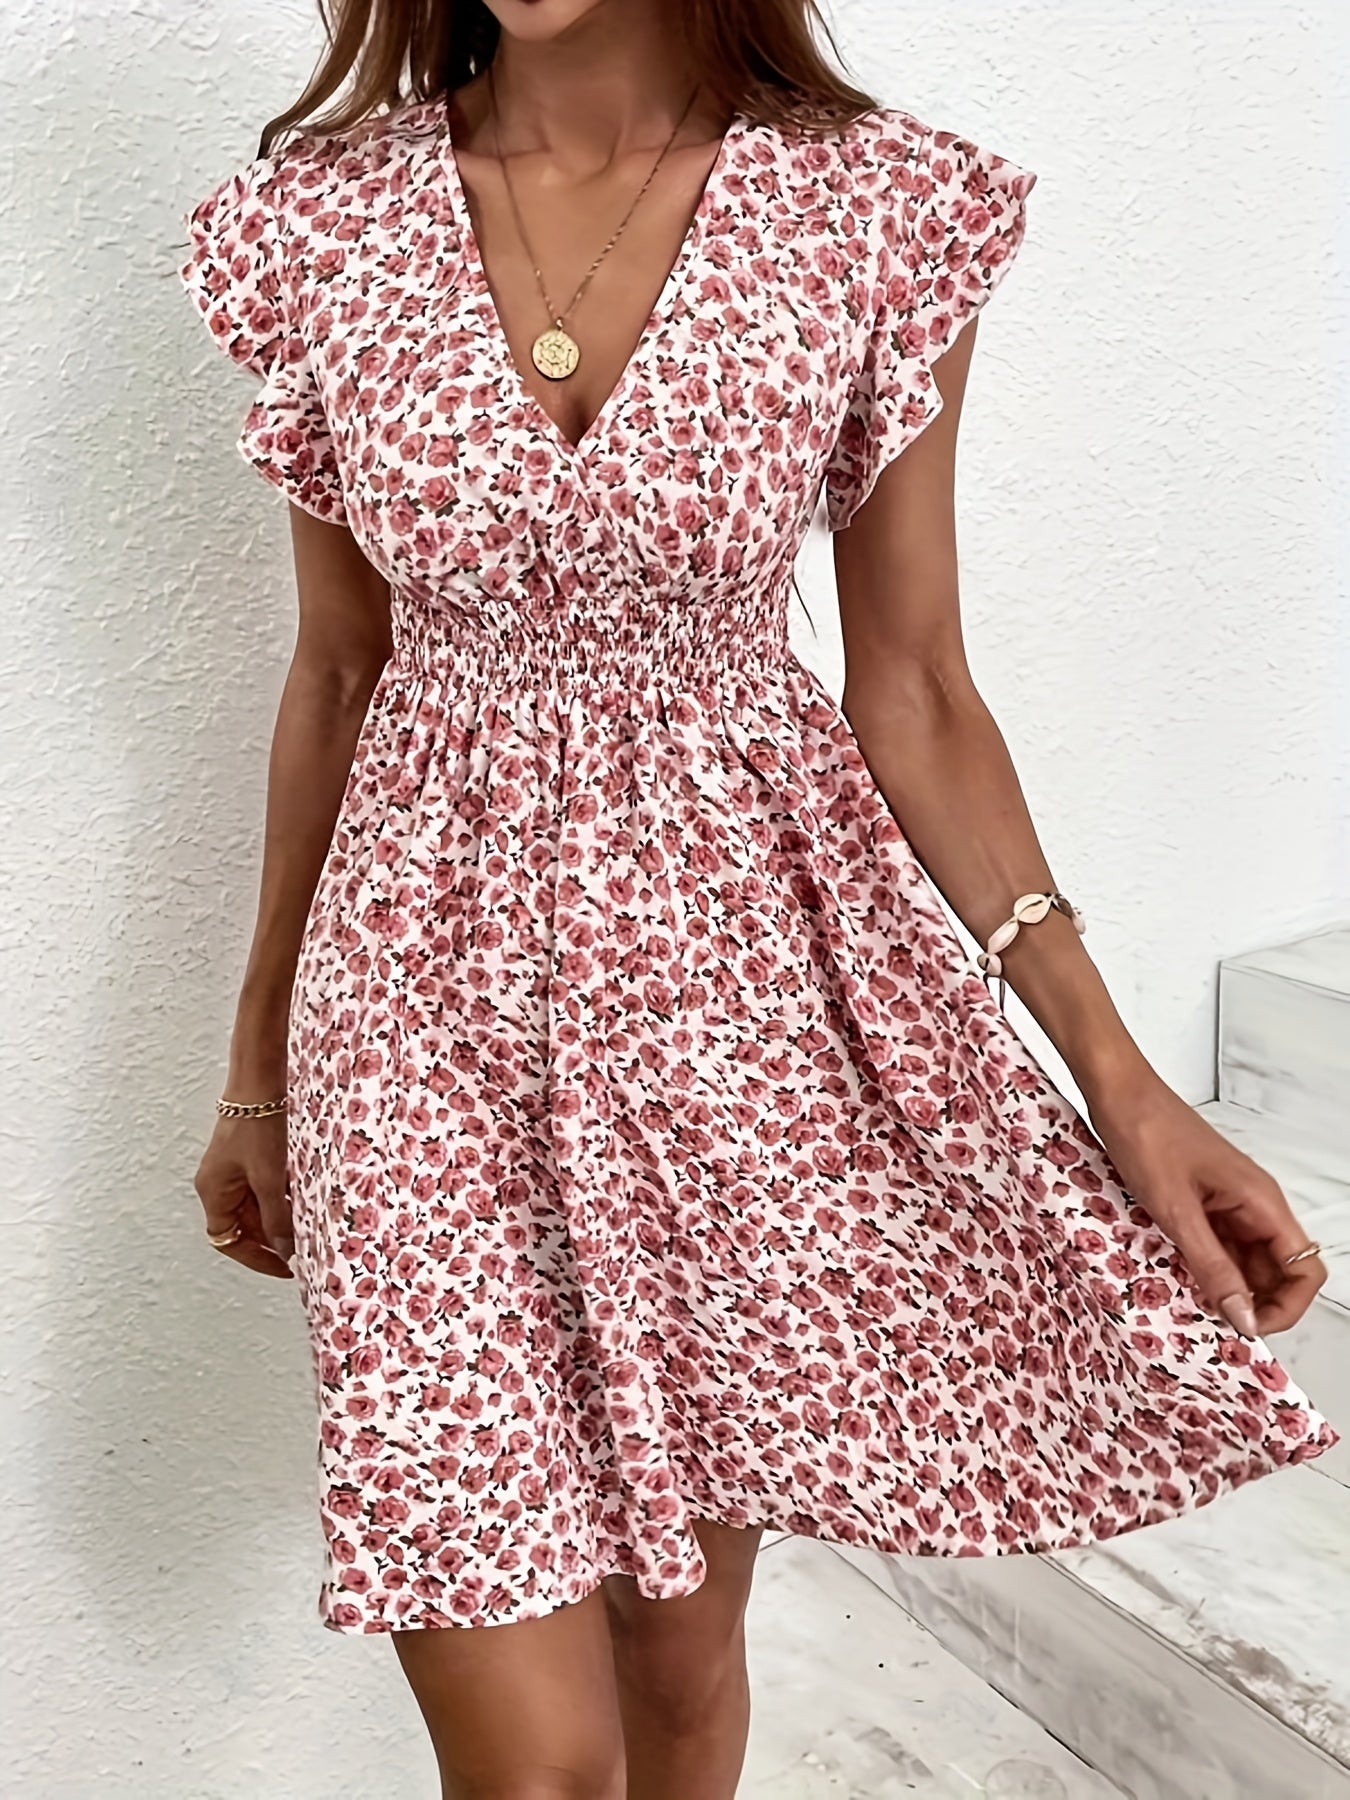 「lovevop」Floral Print V Neck Vacation Dress, Smocked Waist Ruffle Sleeve Casual Dress For Summer & Spring, Women's Clothing